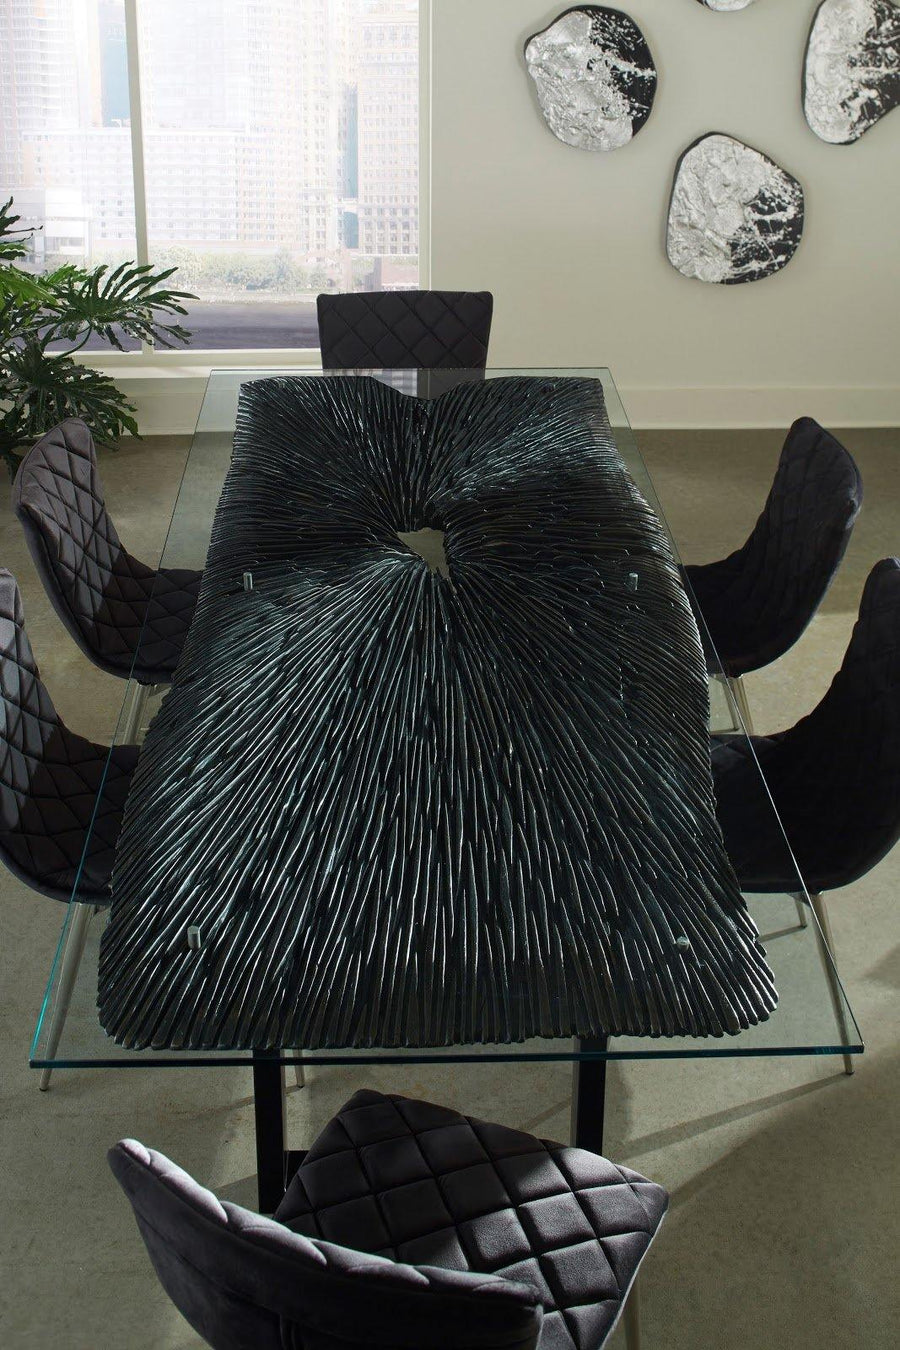 Chainsaw Dining Table with Glass Chamcha Wood, Burnt Black, Black Iron U Legs - Maison Vogue